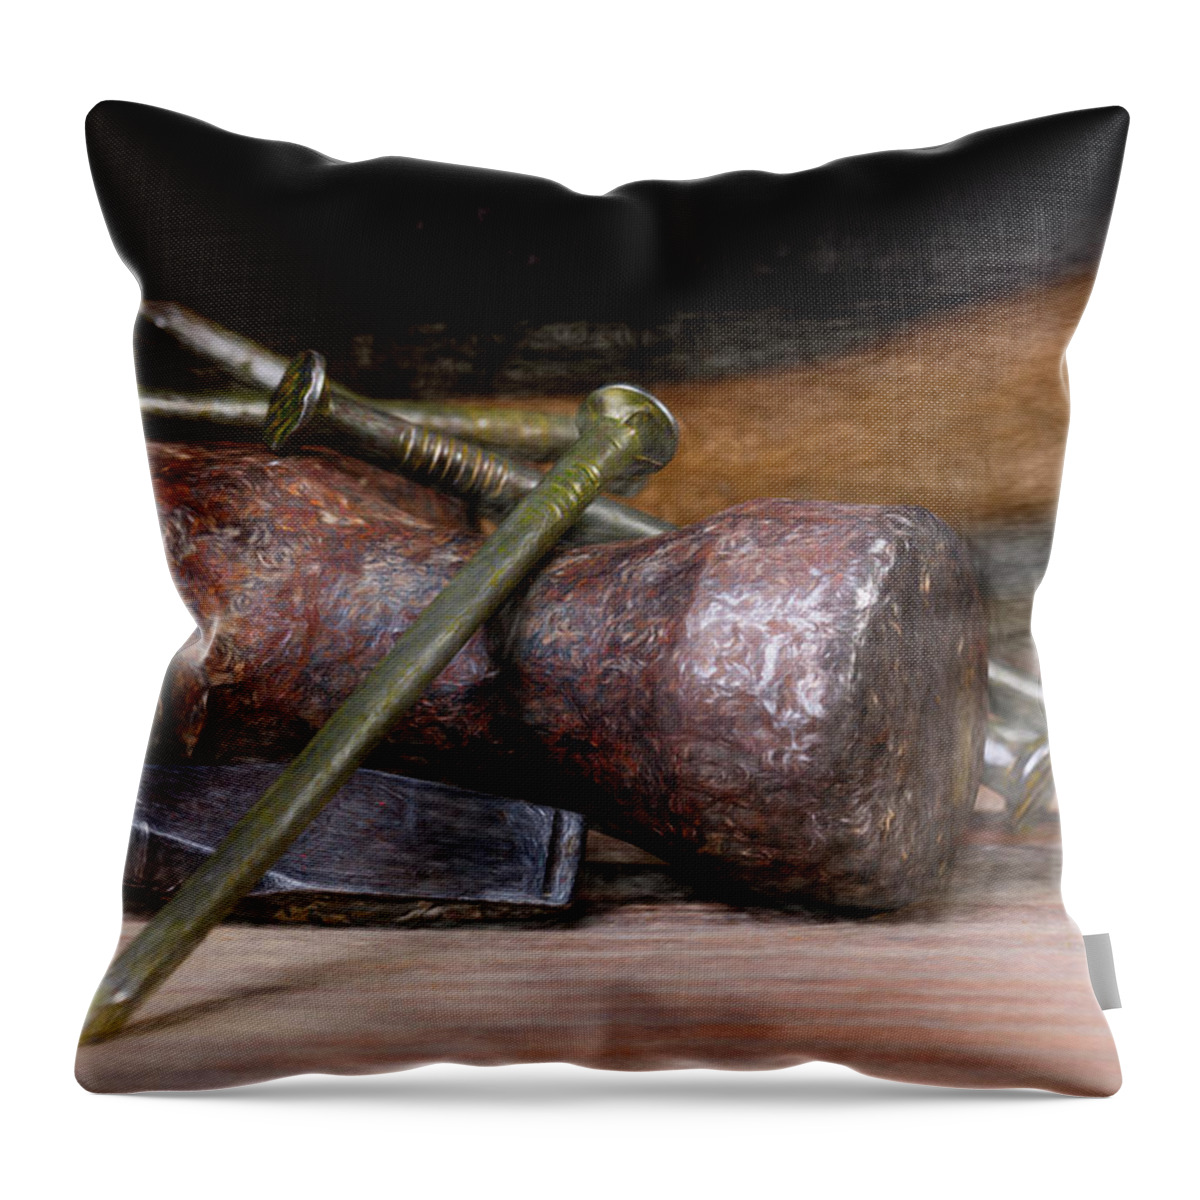 Construction Throw Pillow featuring the photograph Hammer and Nails by Tom Mc Nemar